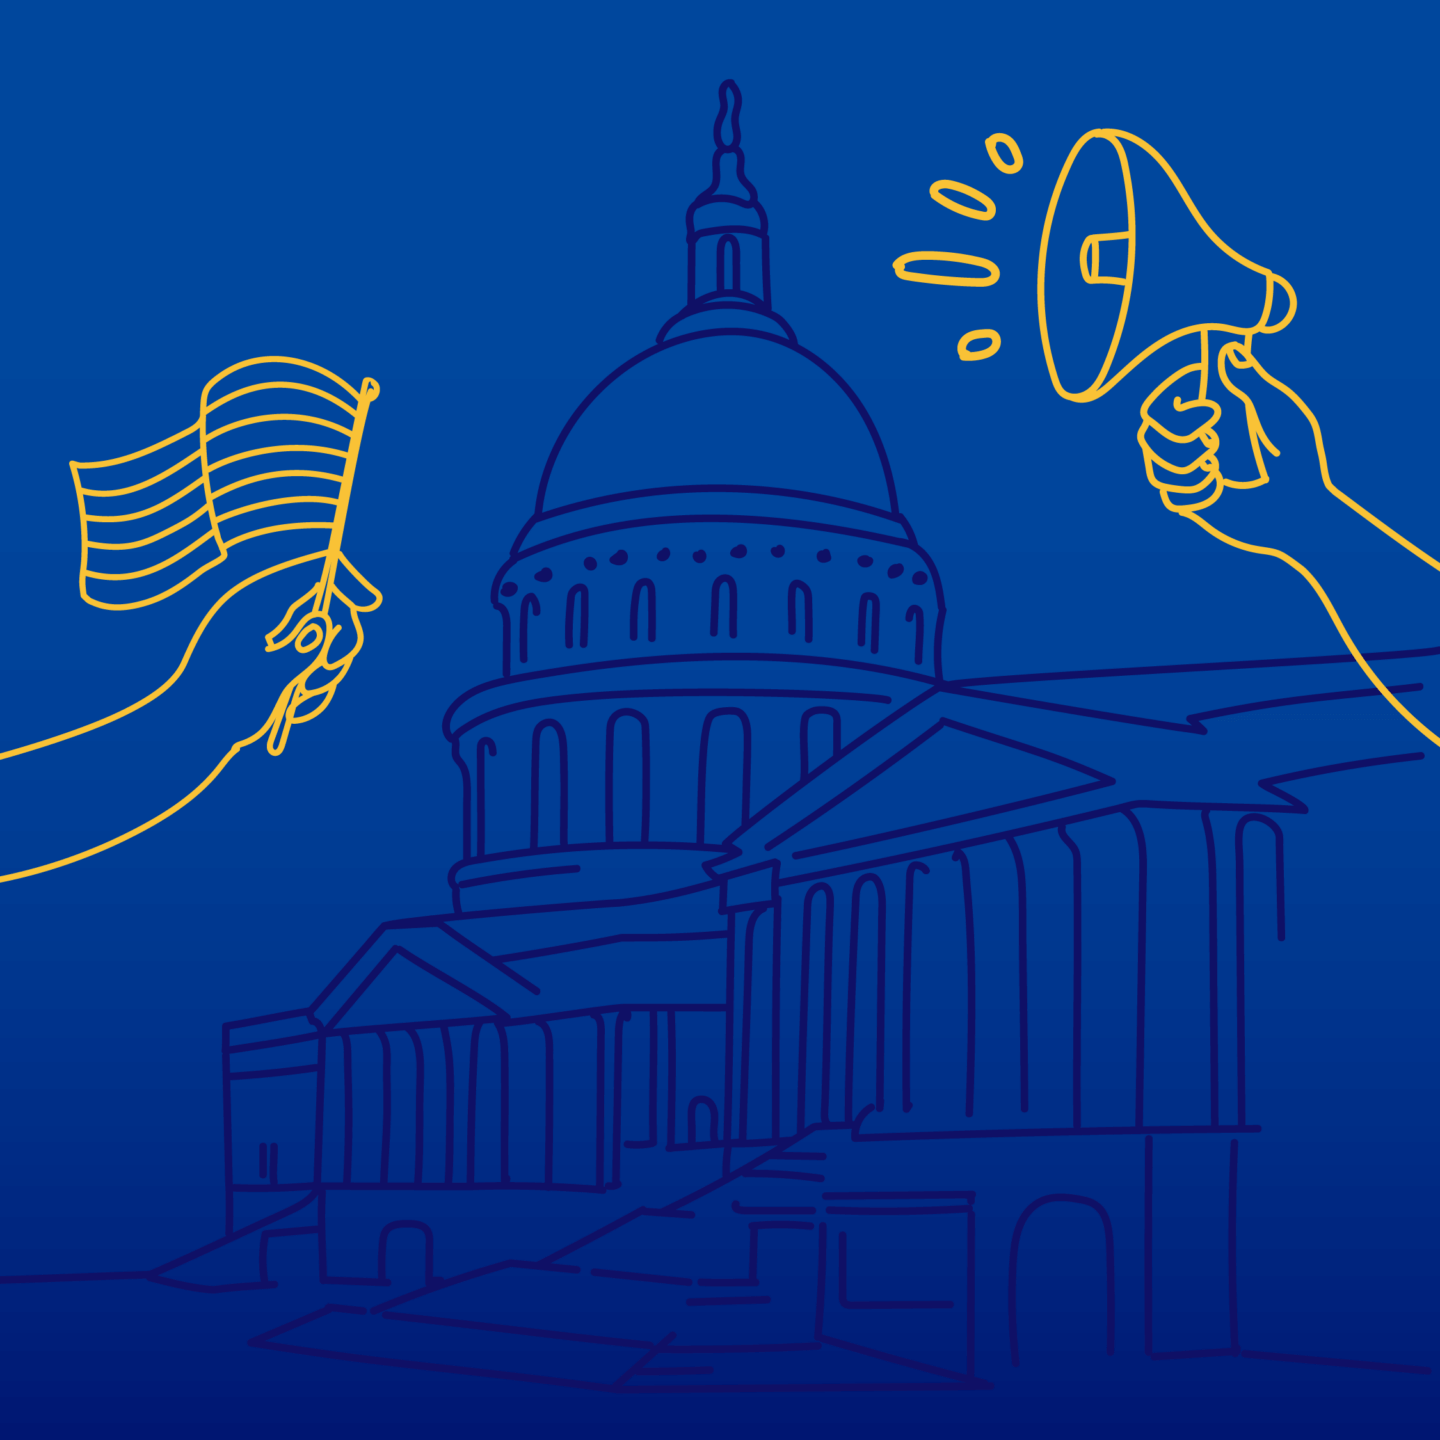 Illustration of hands holding a bullhorn and flag in front of the capital